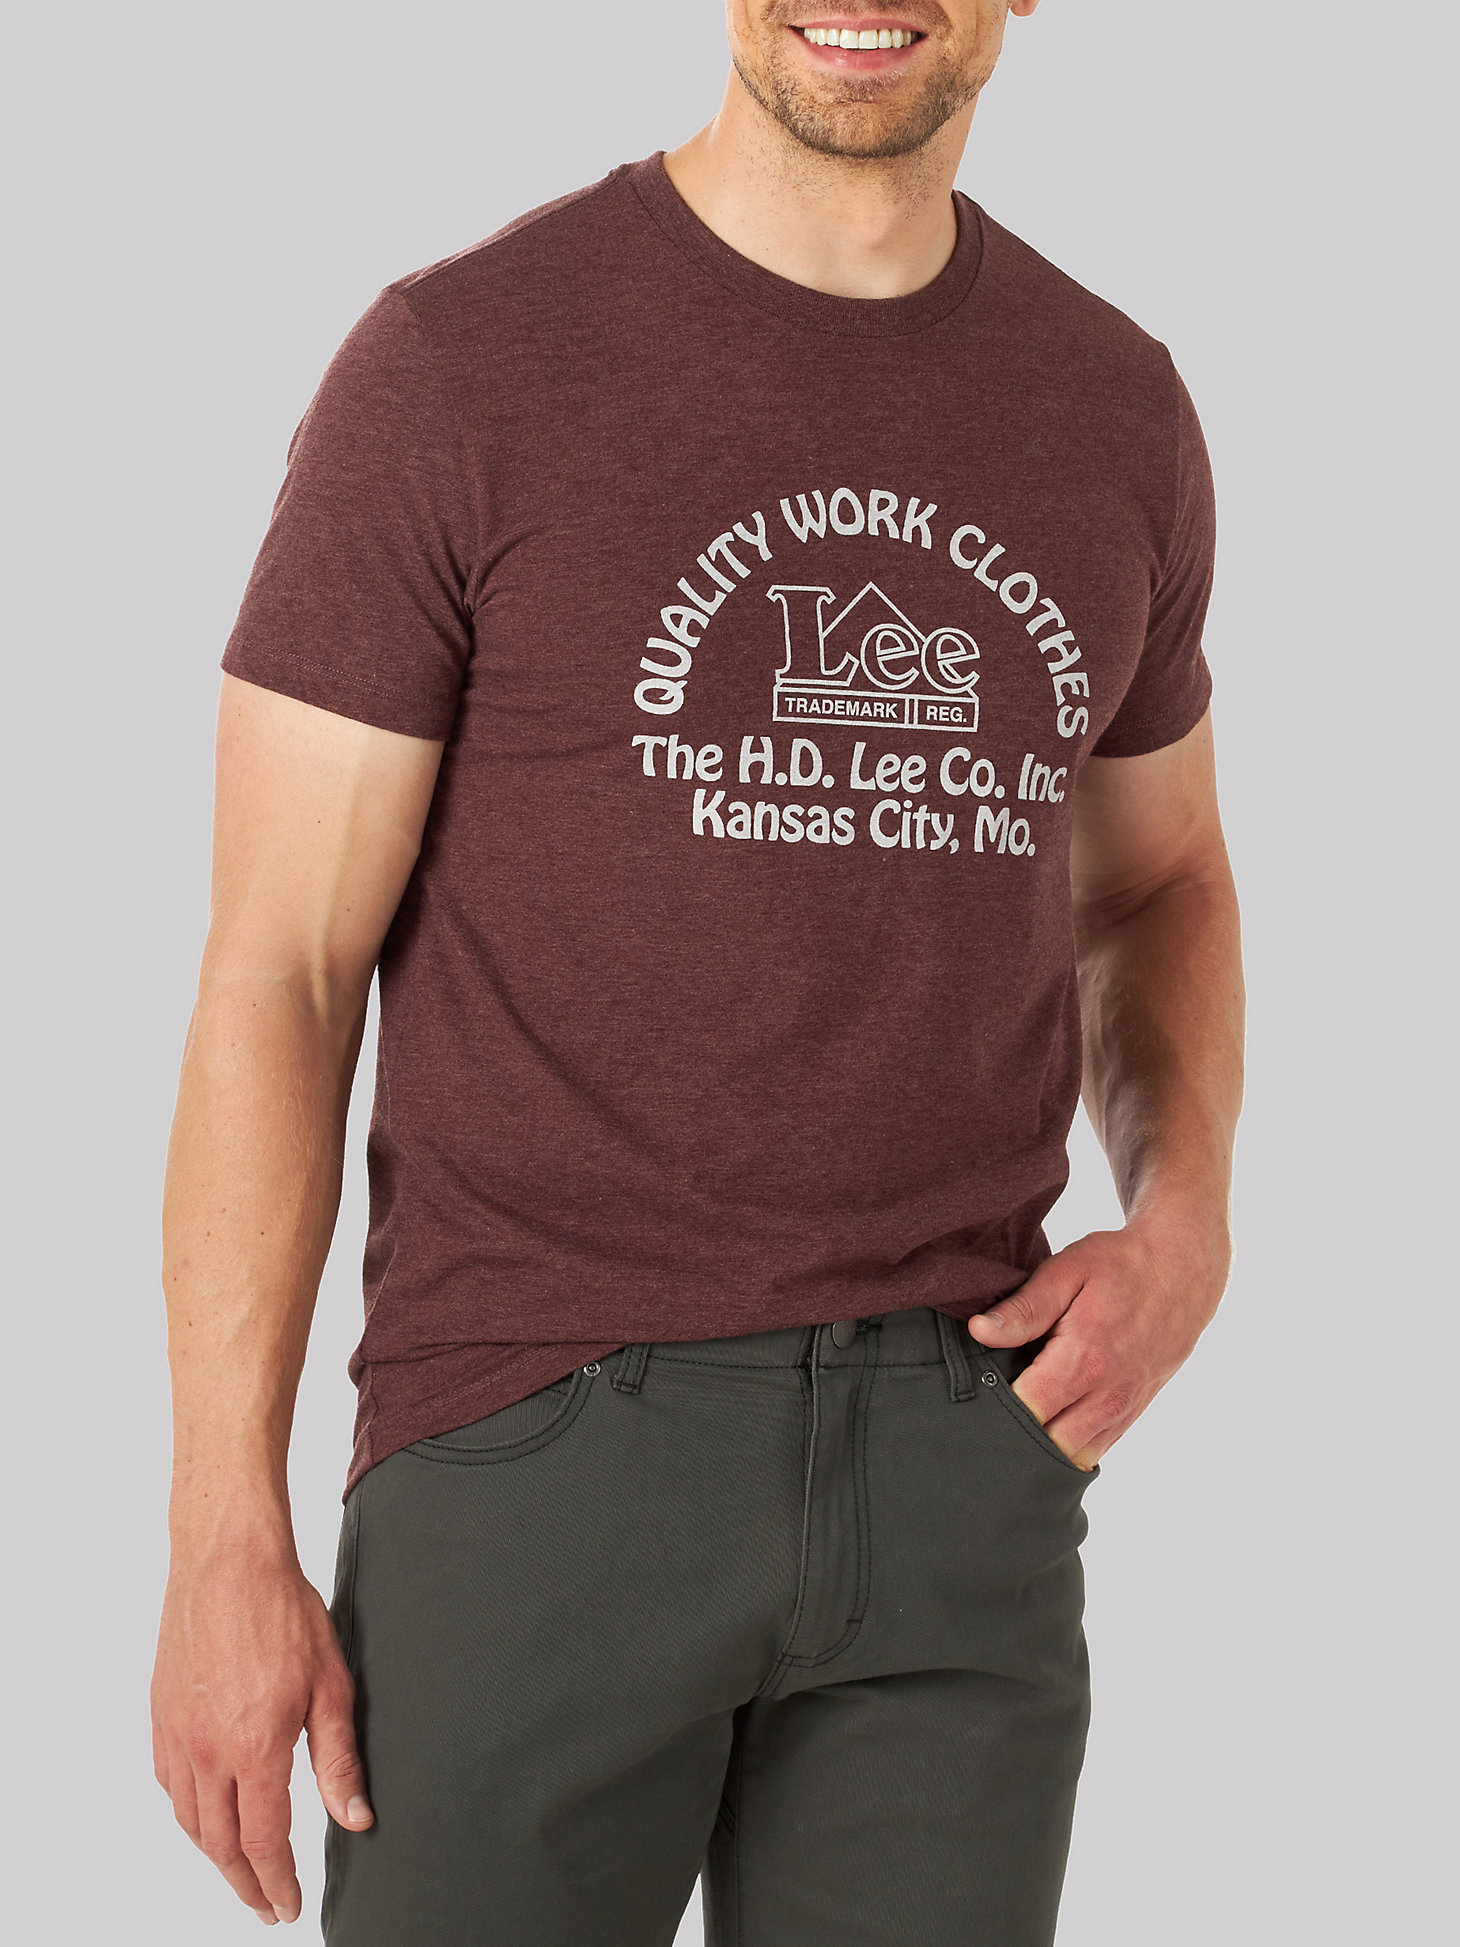 Men's Quality Work Clothes Graphic Tee in Heather Campus main view